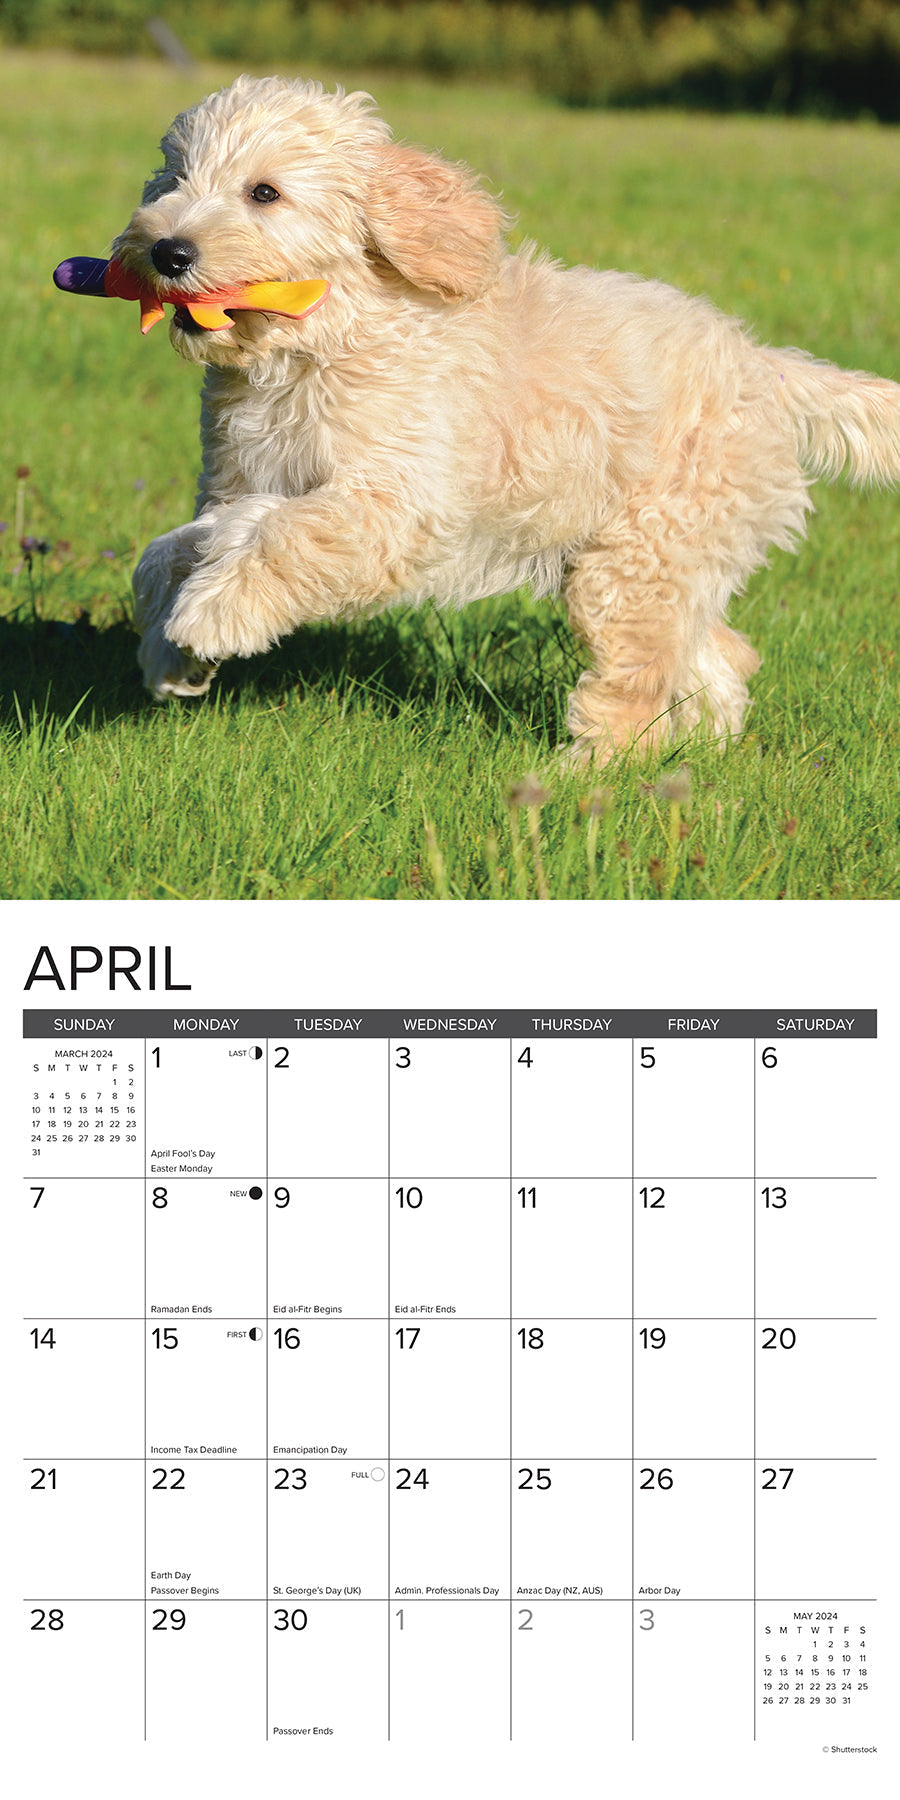 2024 Just Goldendoodle Puppies - Square Wall Calendar US